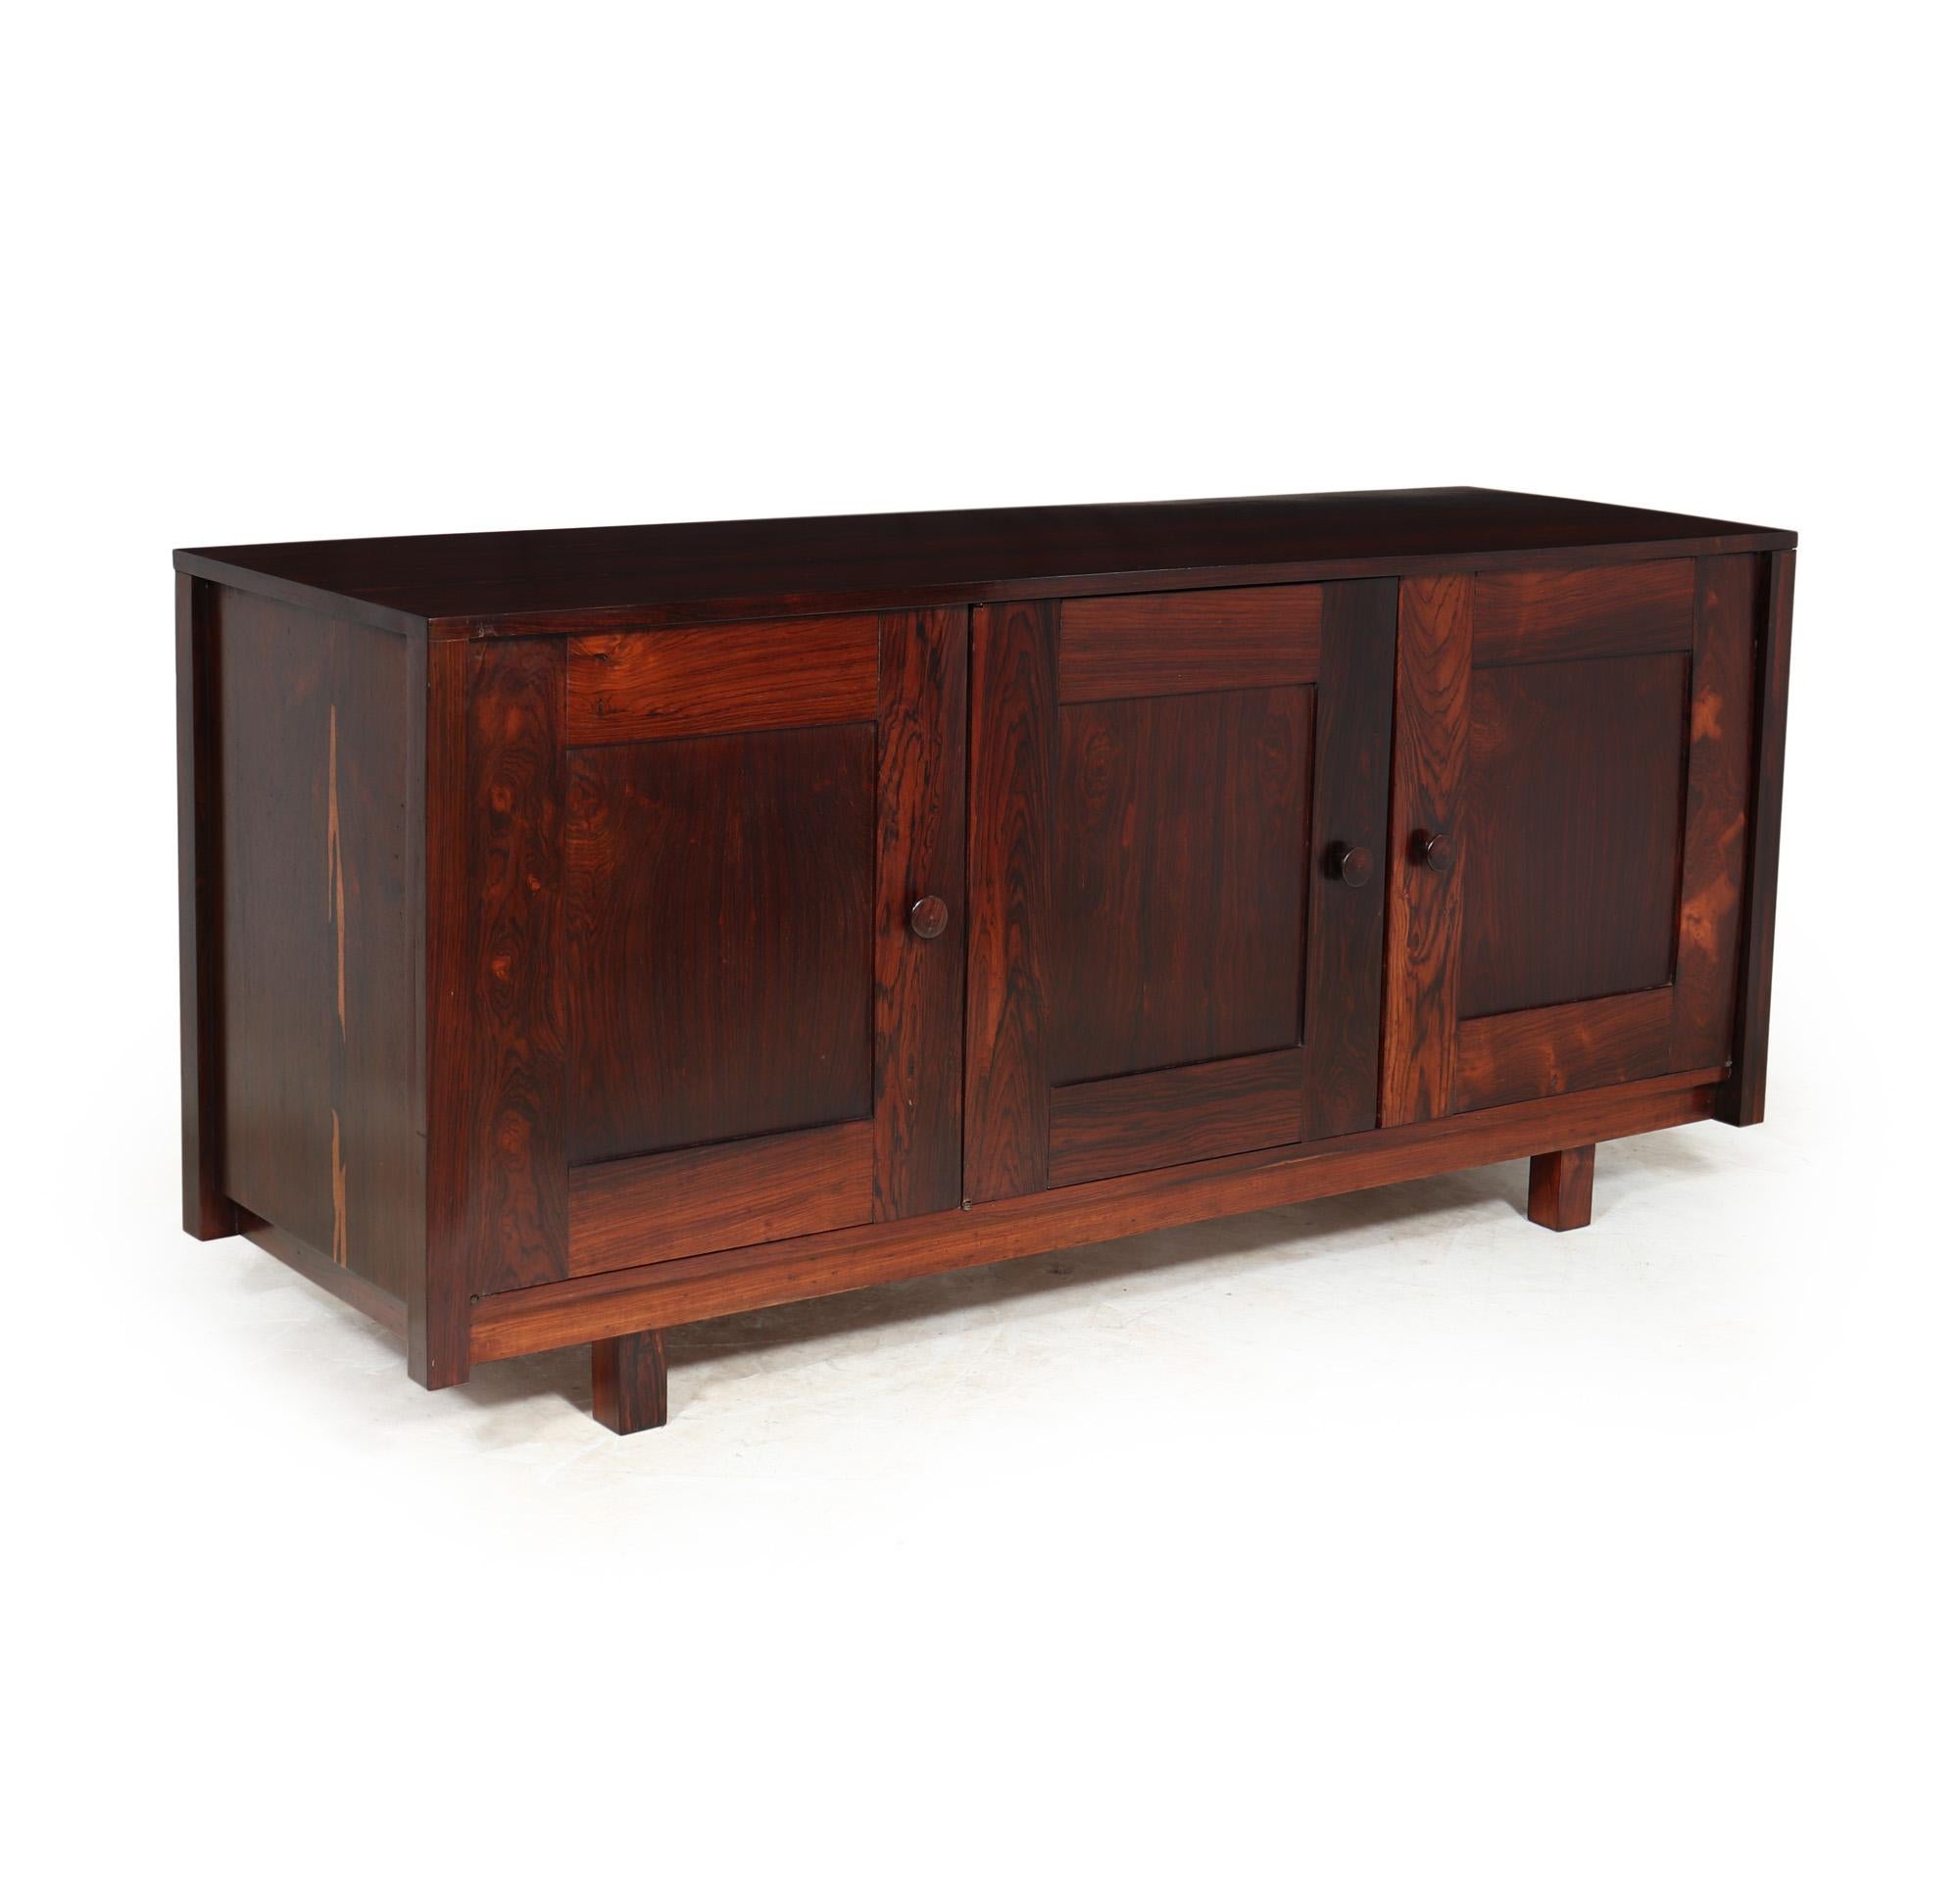 A mid century sideboard produced in Brazil in the 1950’s in rosewood, very stylish in its simplicity having three shaker style doors with adjustable height shelves to the right and a series of baize lined drawers to the left. The sideboard has been